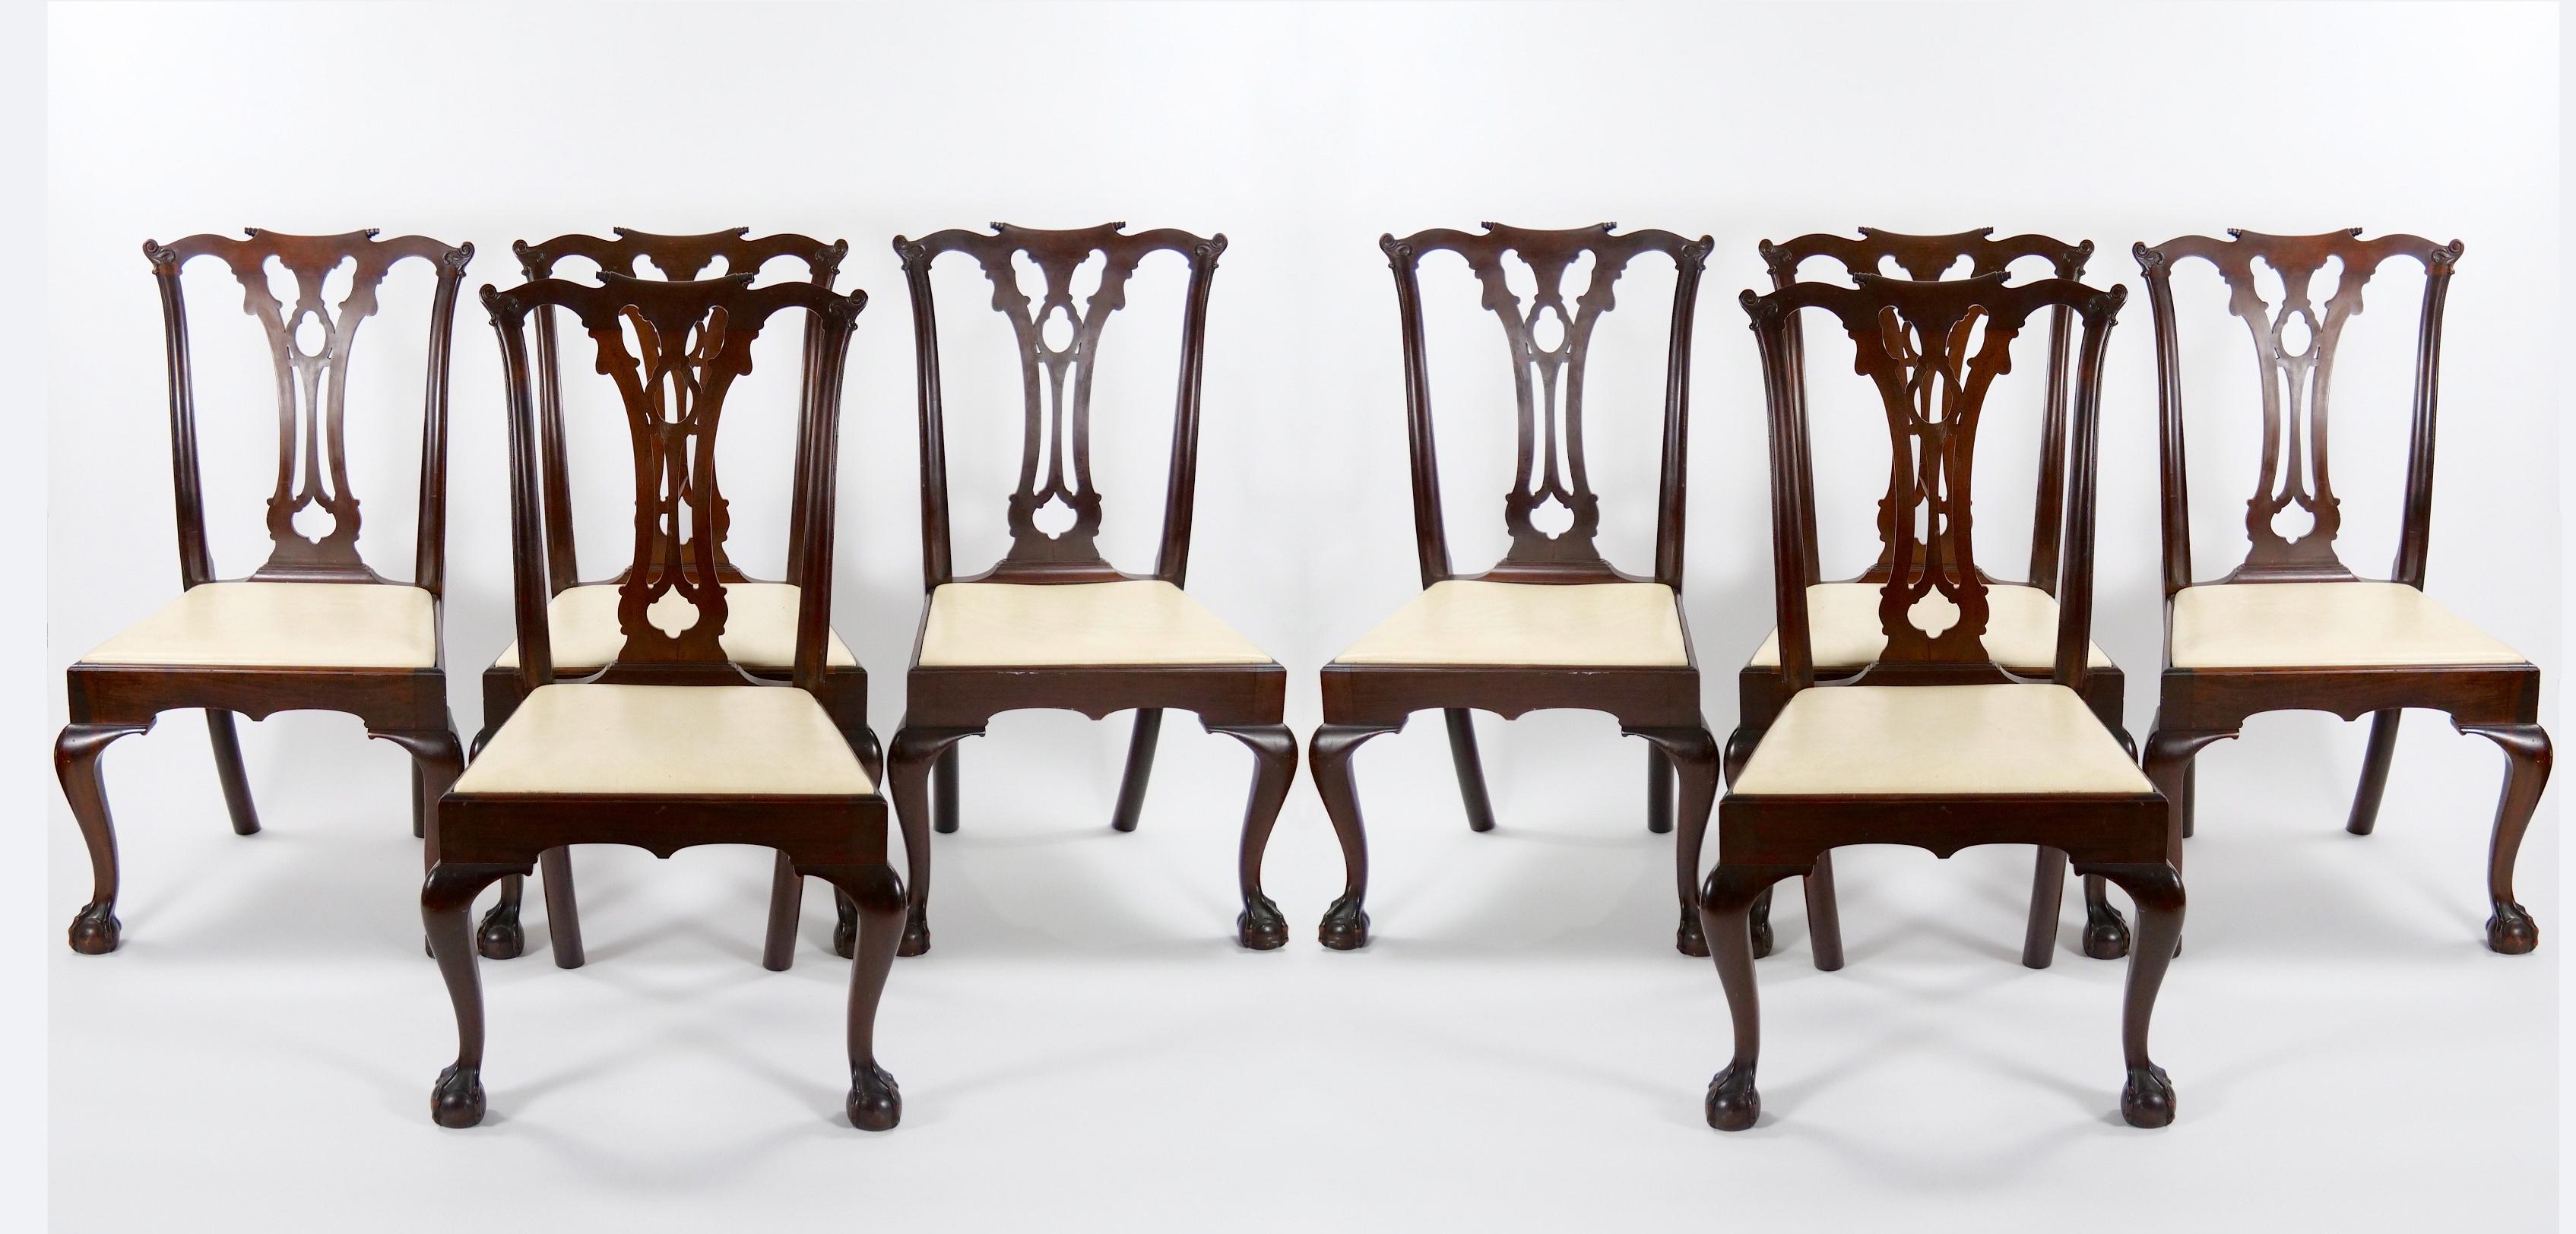 Enhance your dining space with this captivating set of eight antique Mahogany Dining Chairs, designed in the distinguished English Chippendale style. These chairs are more than just functional; they are a testament to classic design and